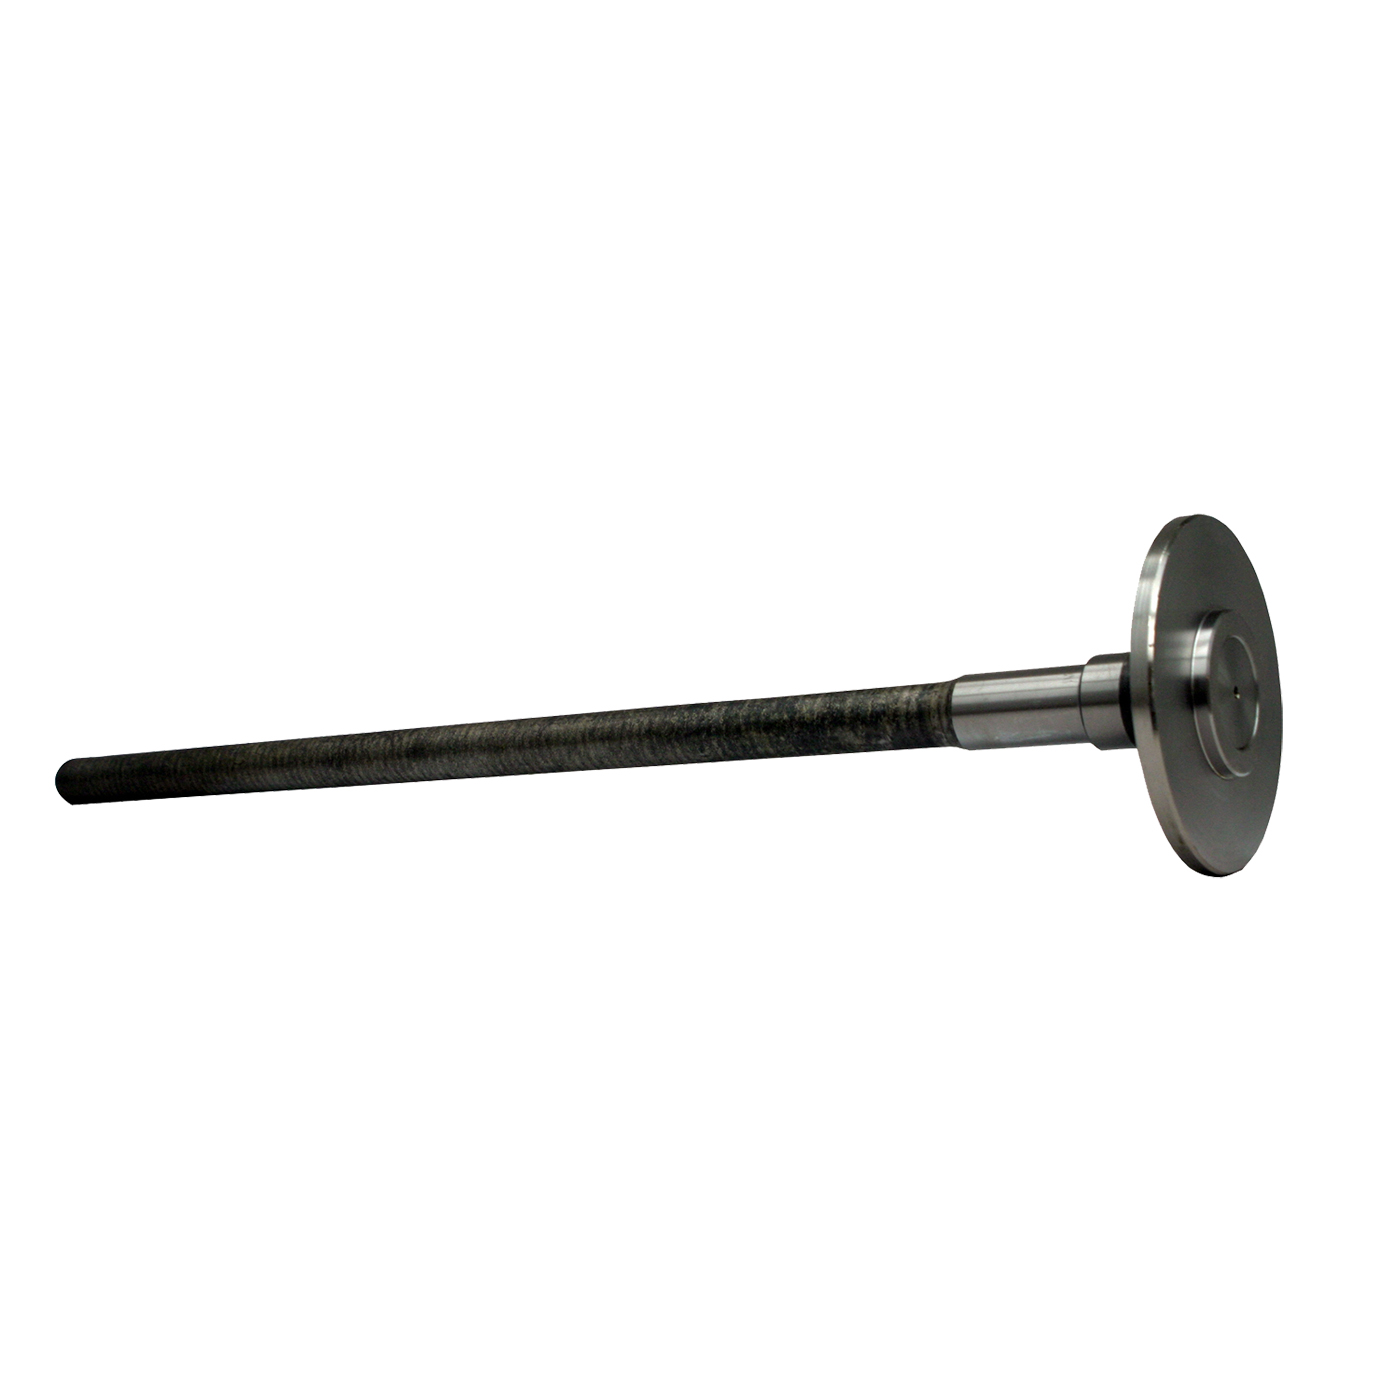 Semi-floating axle blank with C/clip. 34.44" inches long 